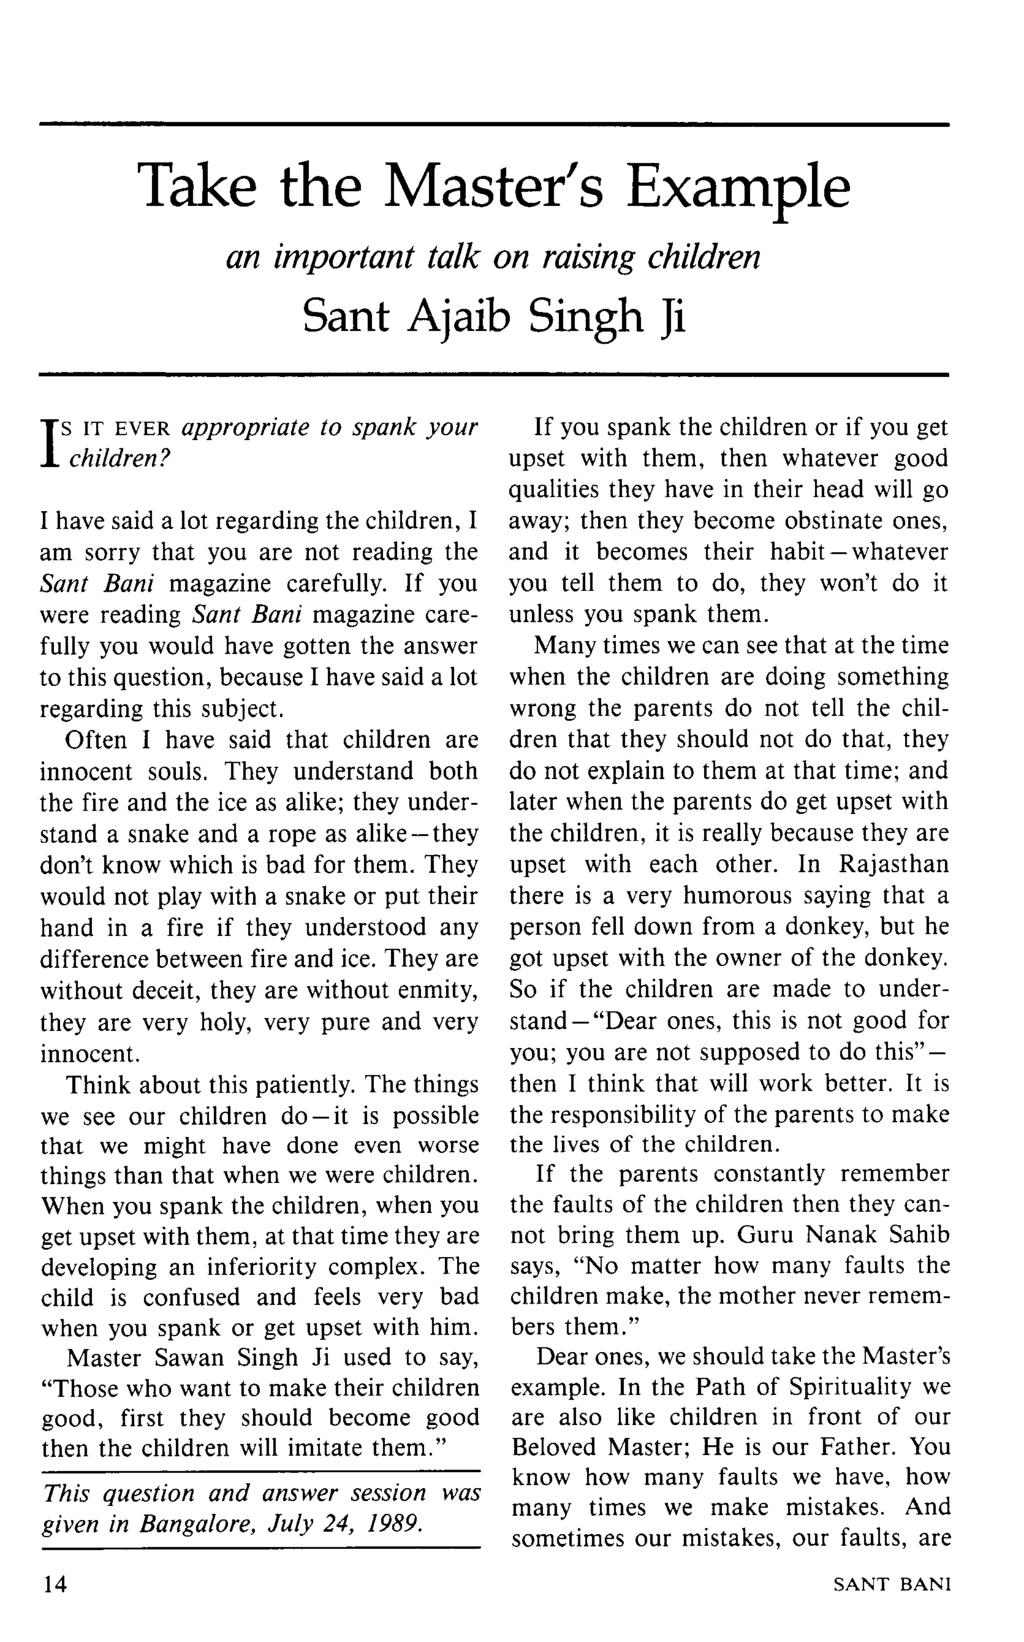 Take the Master's Example an important talk on raking children Sant Ajaib Singh Ji s IT EVER appropriate to spank your I children?